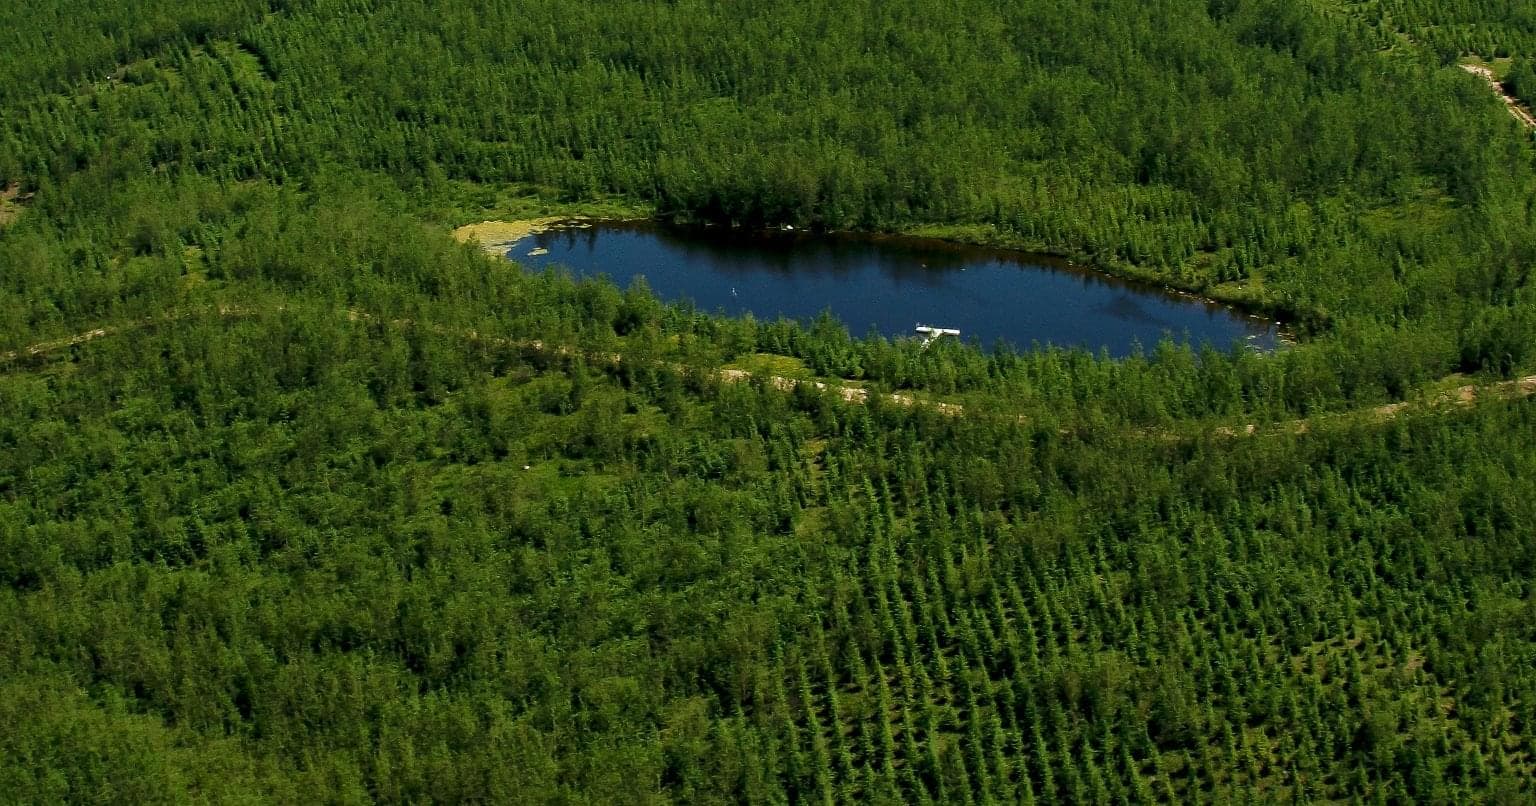 An aerial photo of a lake surrounded by green trees.